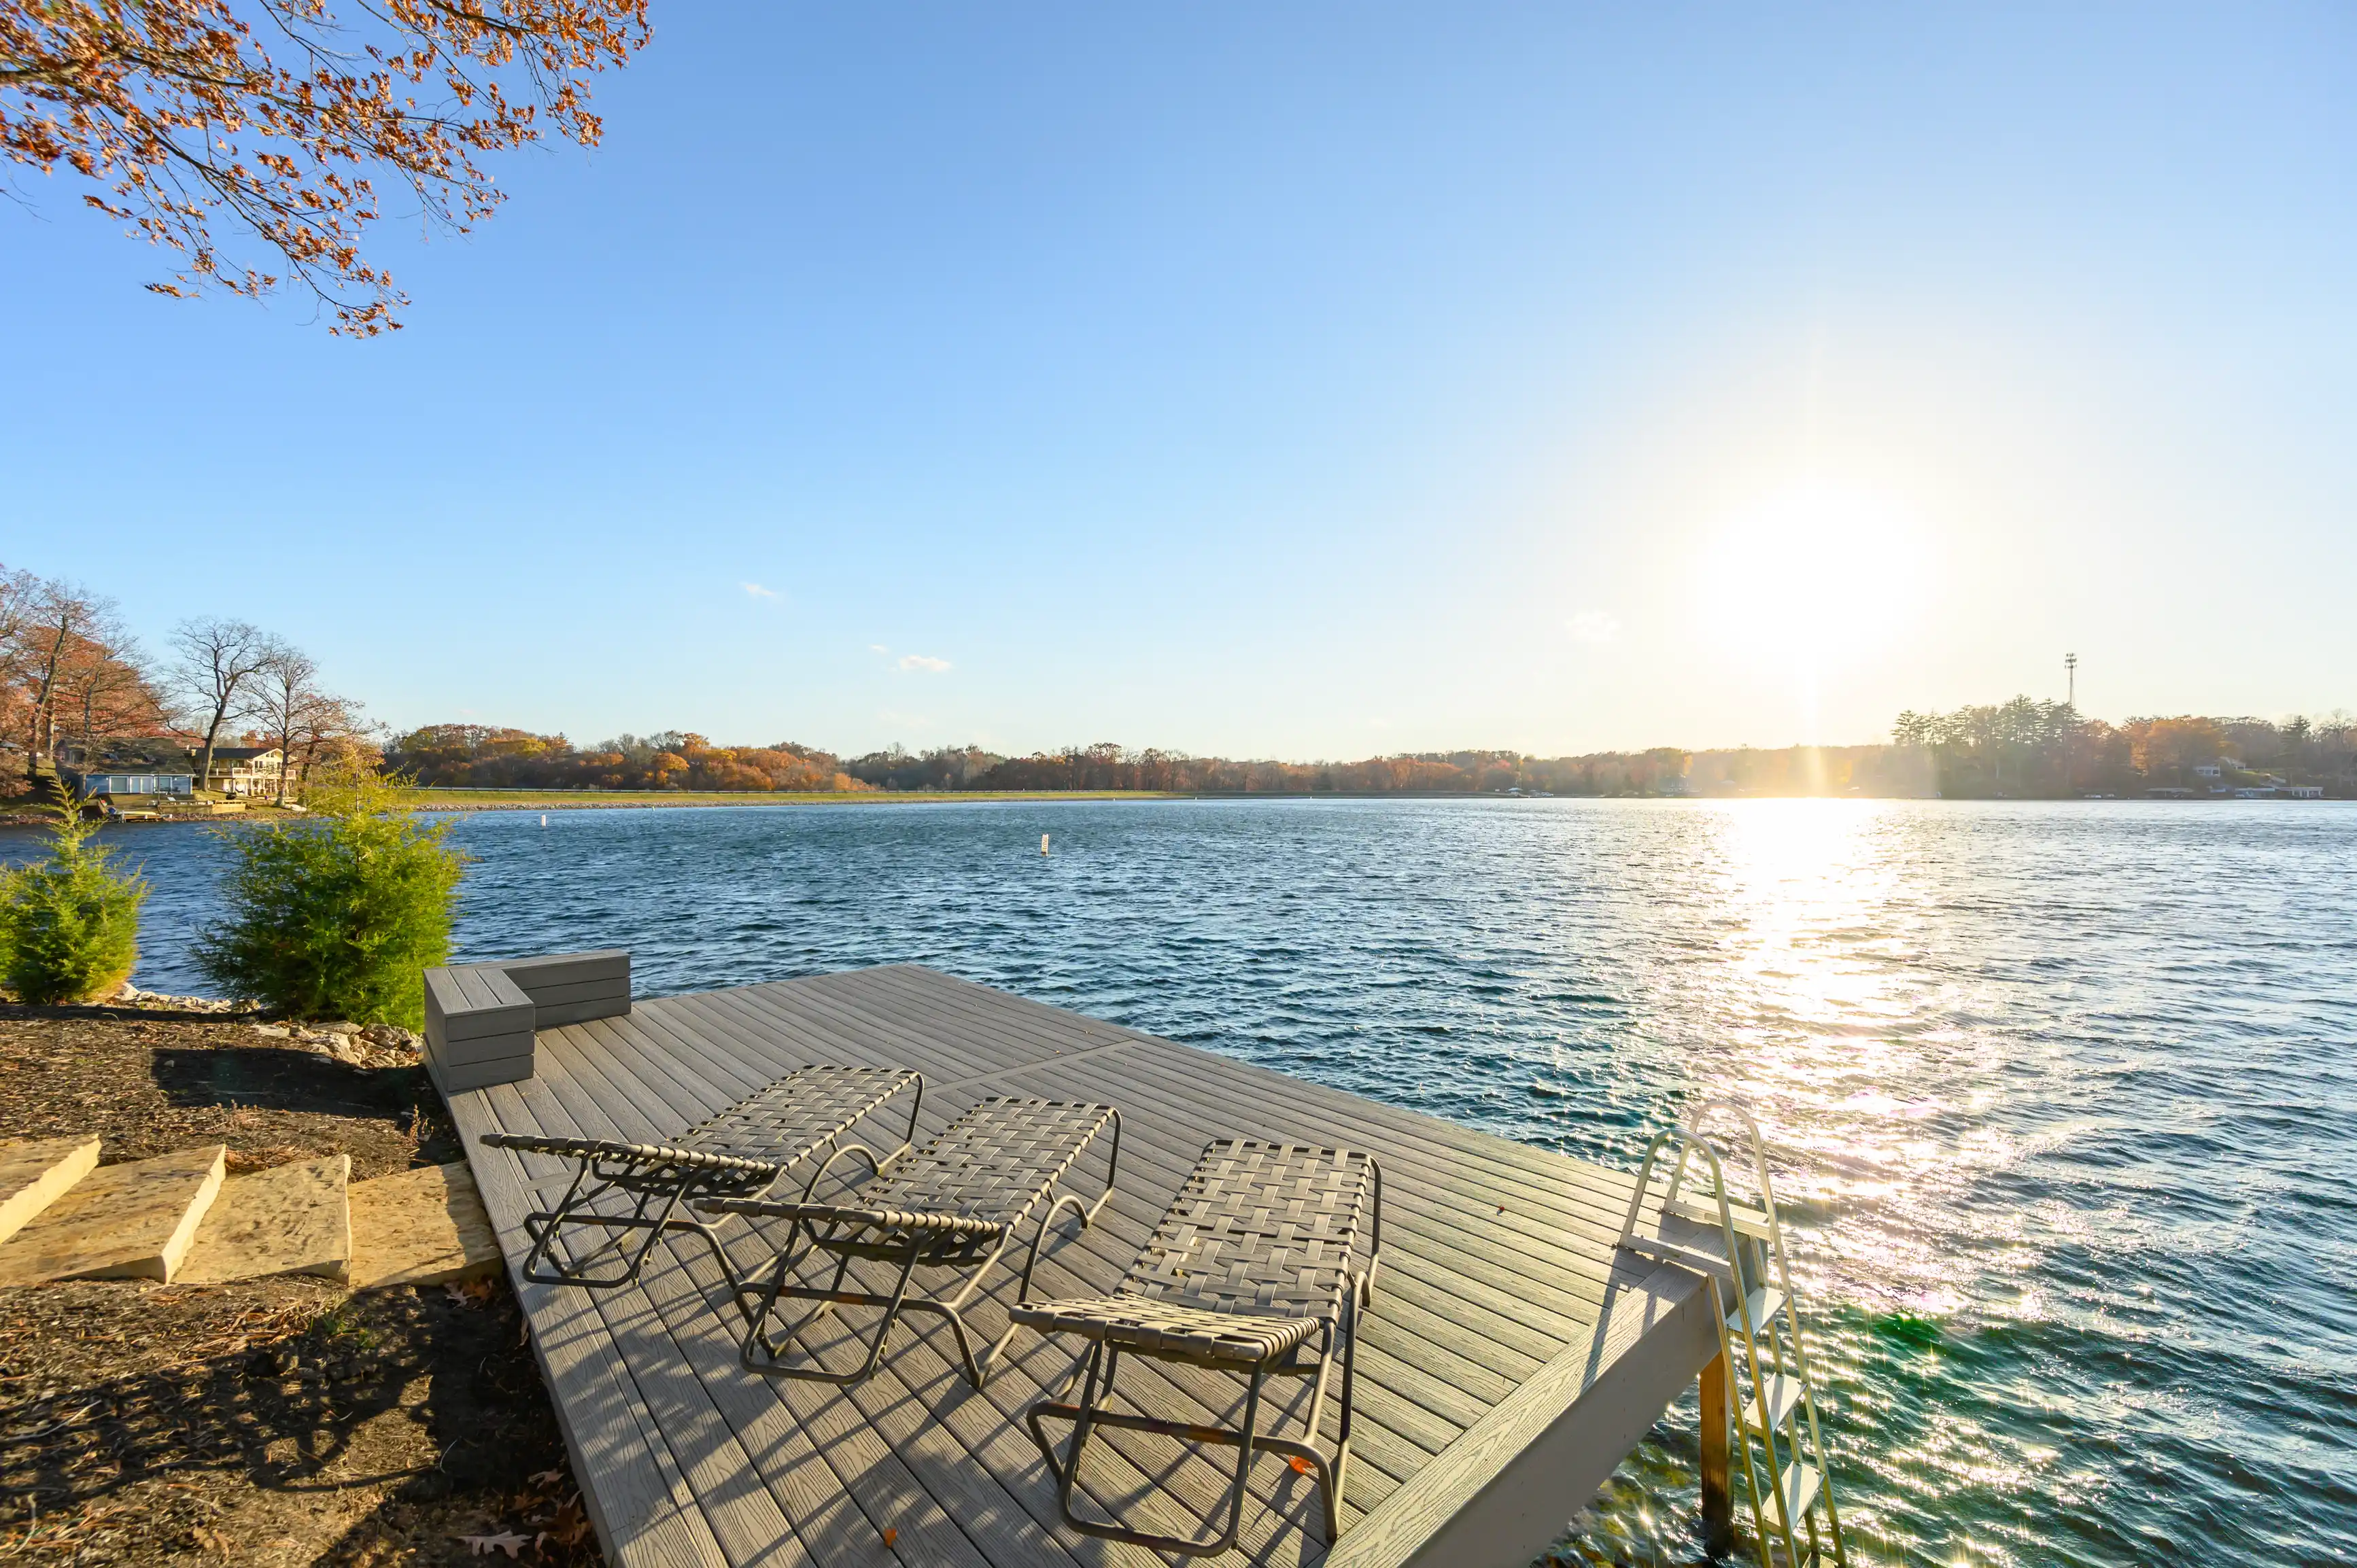 Lake view from a wooden pier with lounge chairs during autumn, with the sun setting over the water creating a sparkling effect.